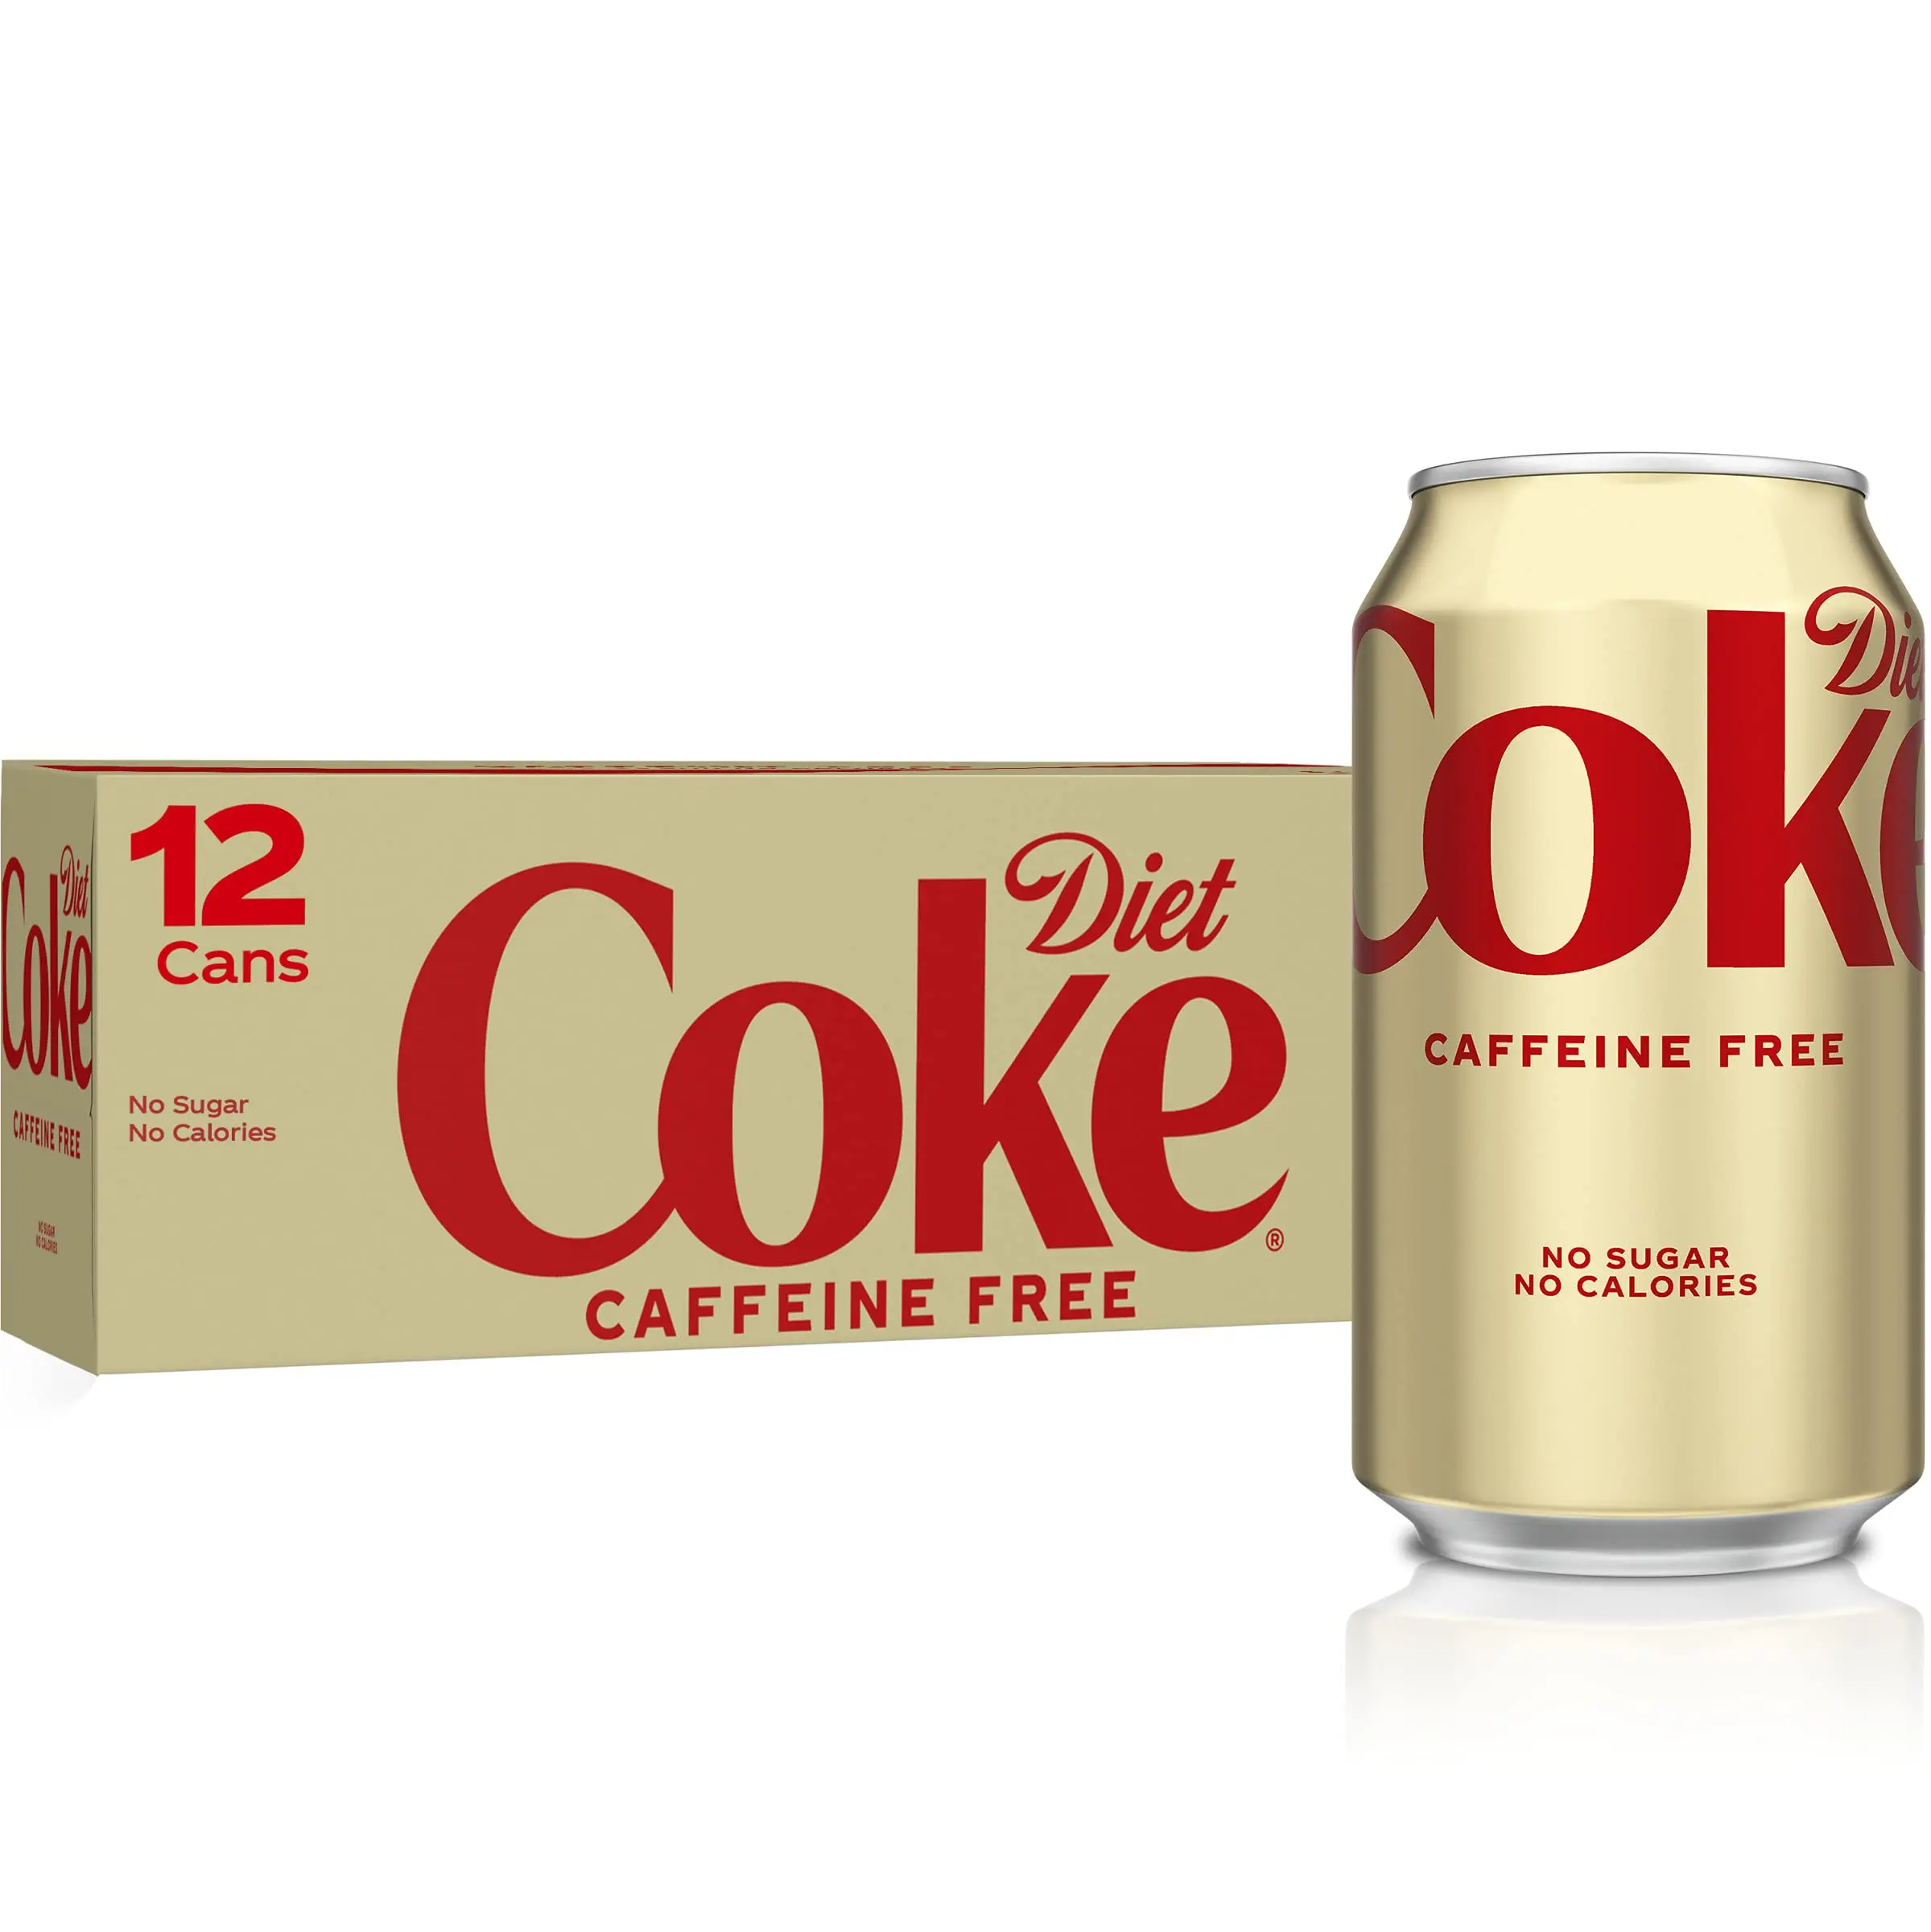 Original can and bottled Coca Cola / Diet Coke